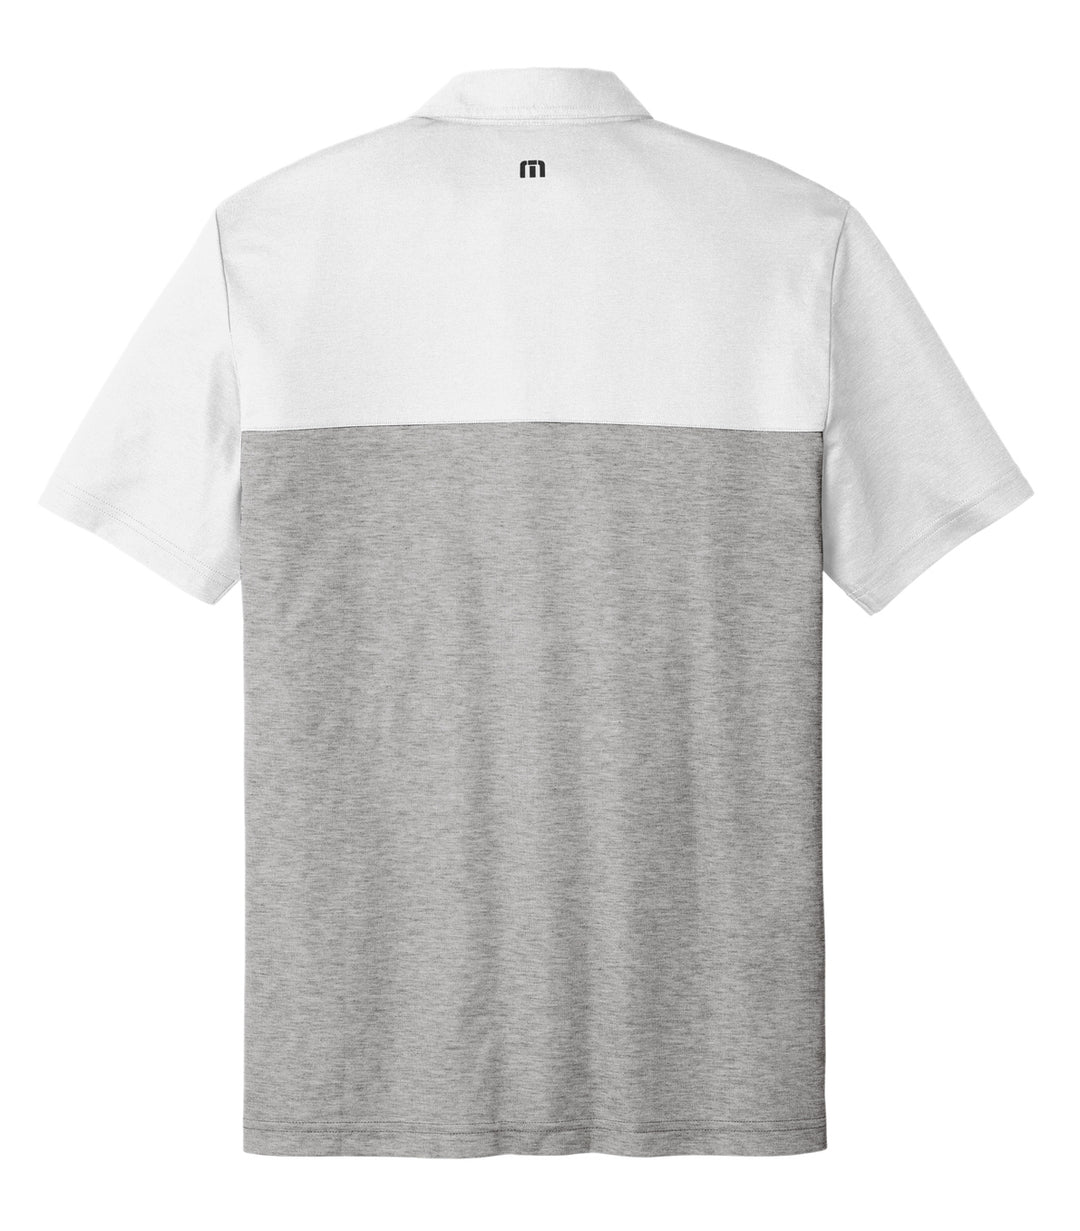 Back of white and grey Travis Mathew Colorblock Polo